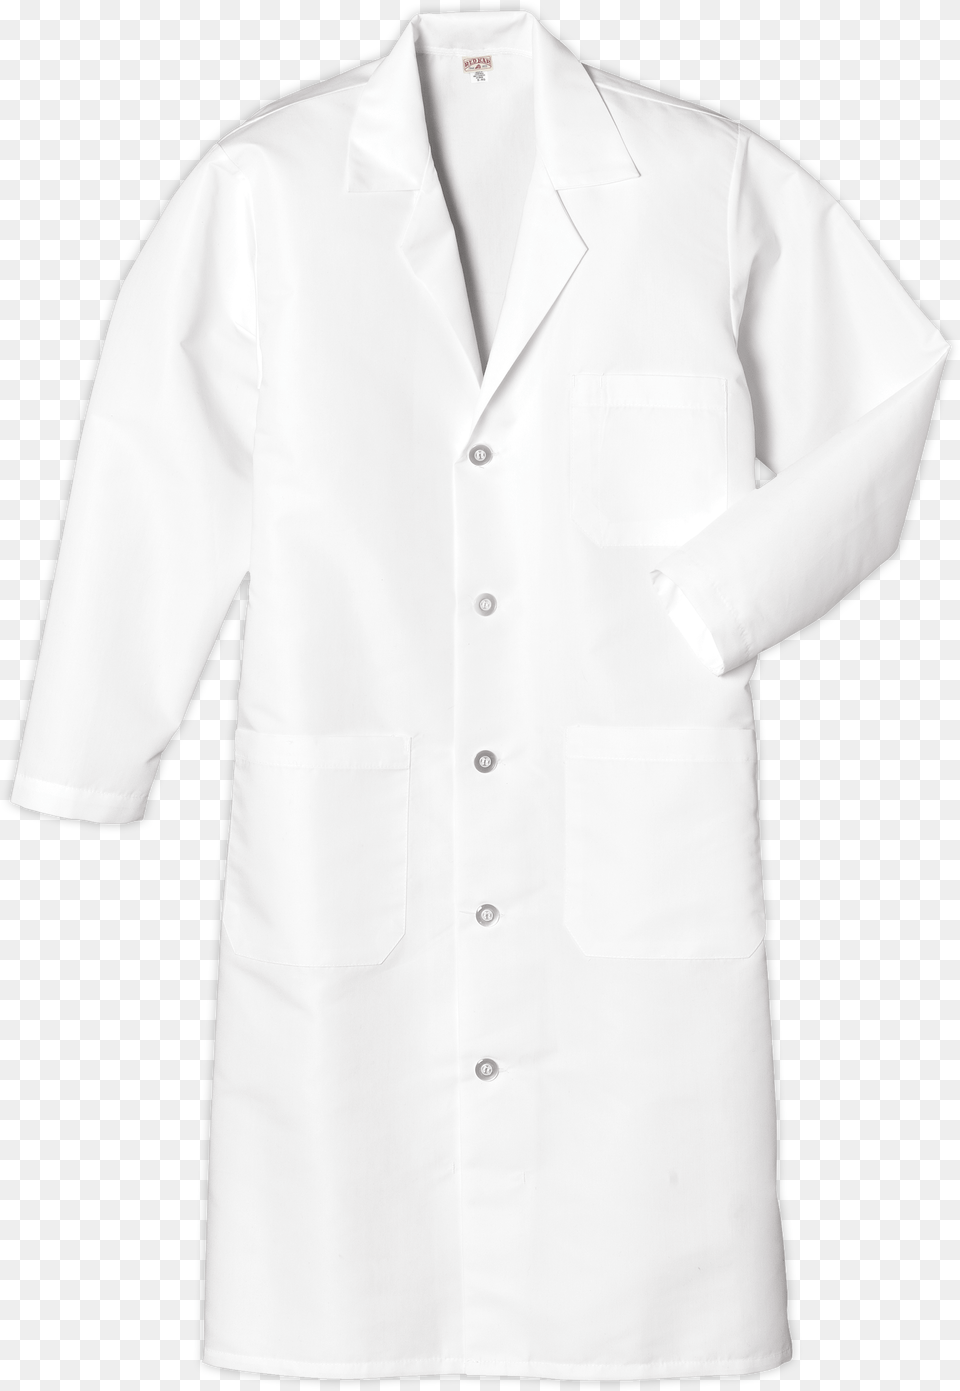 Camice Infermiere White Polo Shirt File, Clothing, Coat, Lab Coat Free Transparent Png